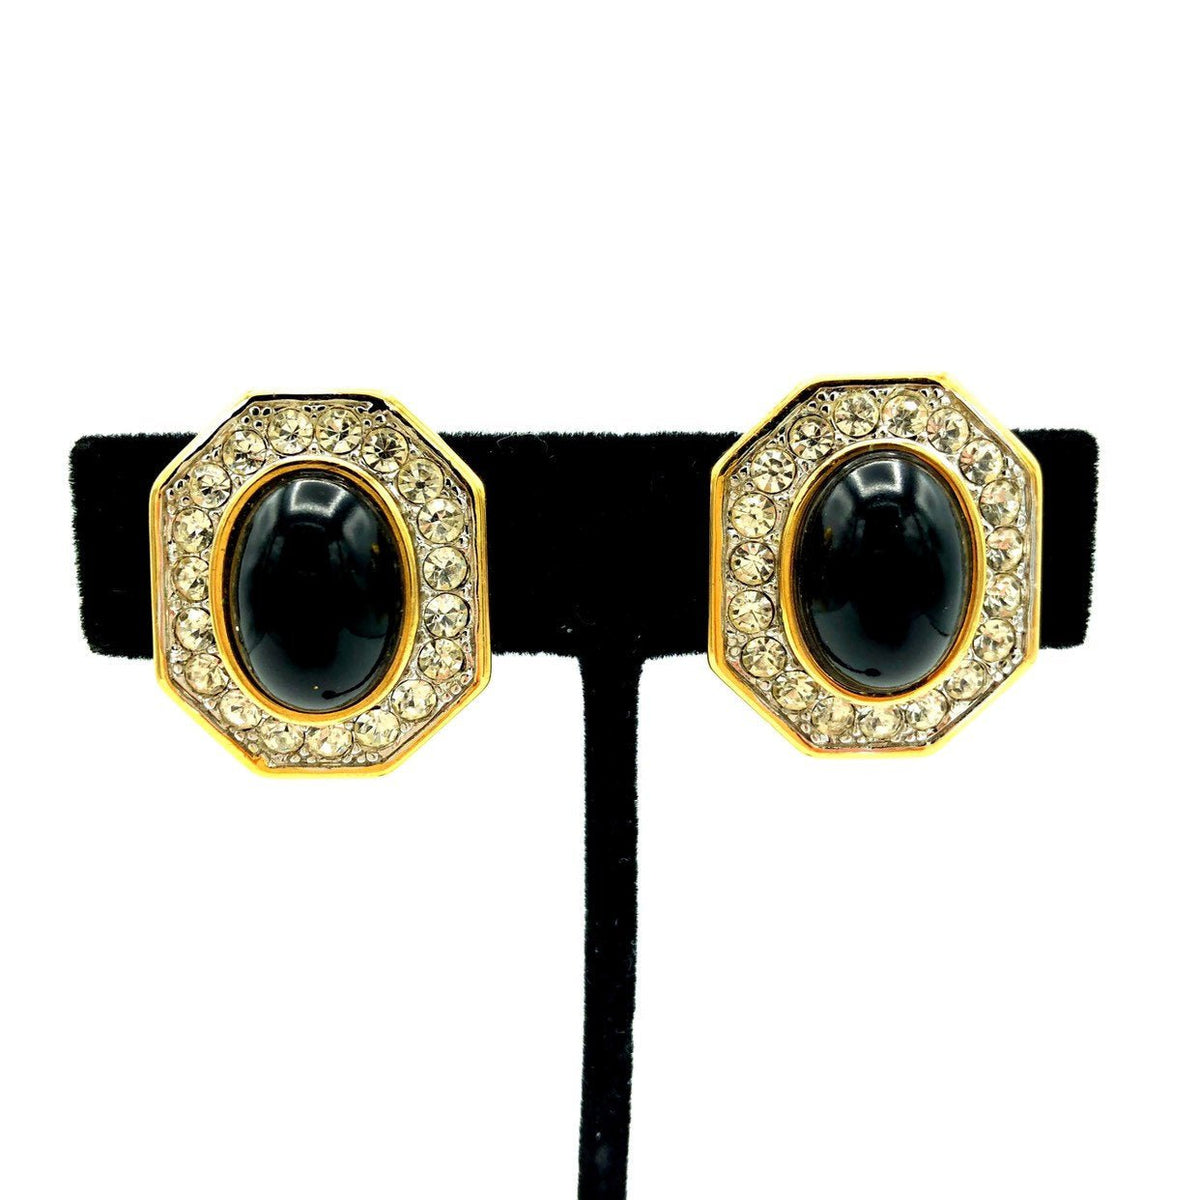 Nina Ricci Classic Gold Black Cabochon Vintage Clip-On Earrings - 24 Wishes Vintage Jewelry